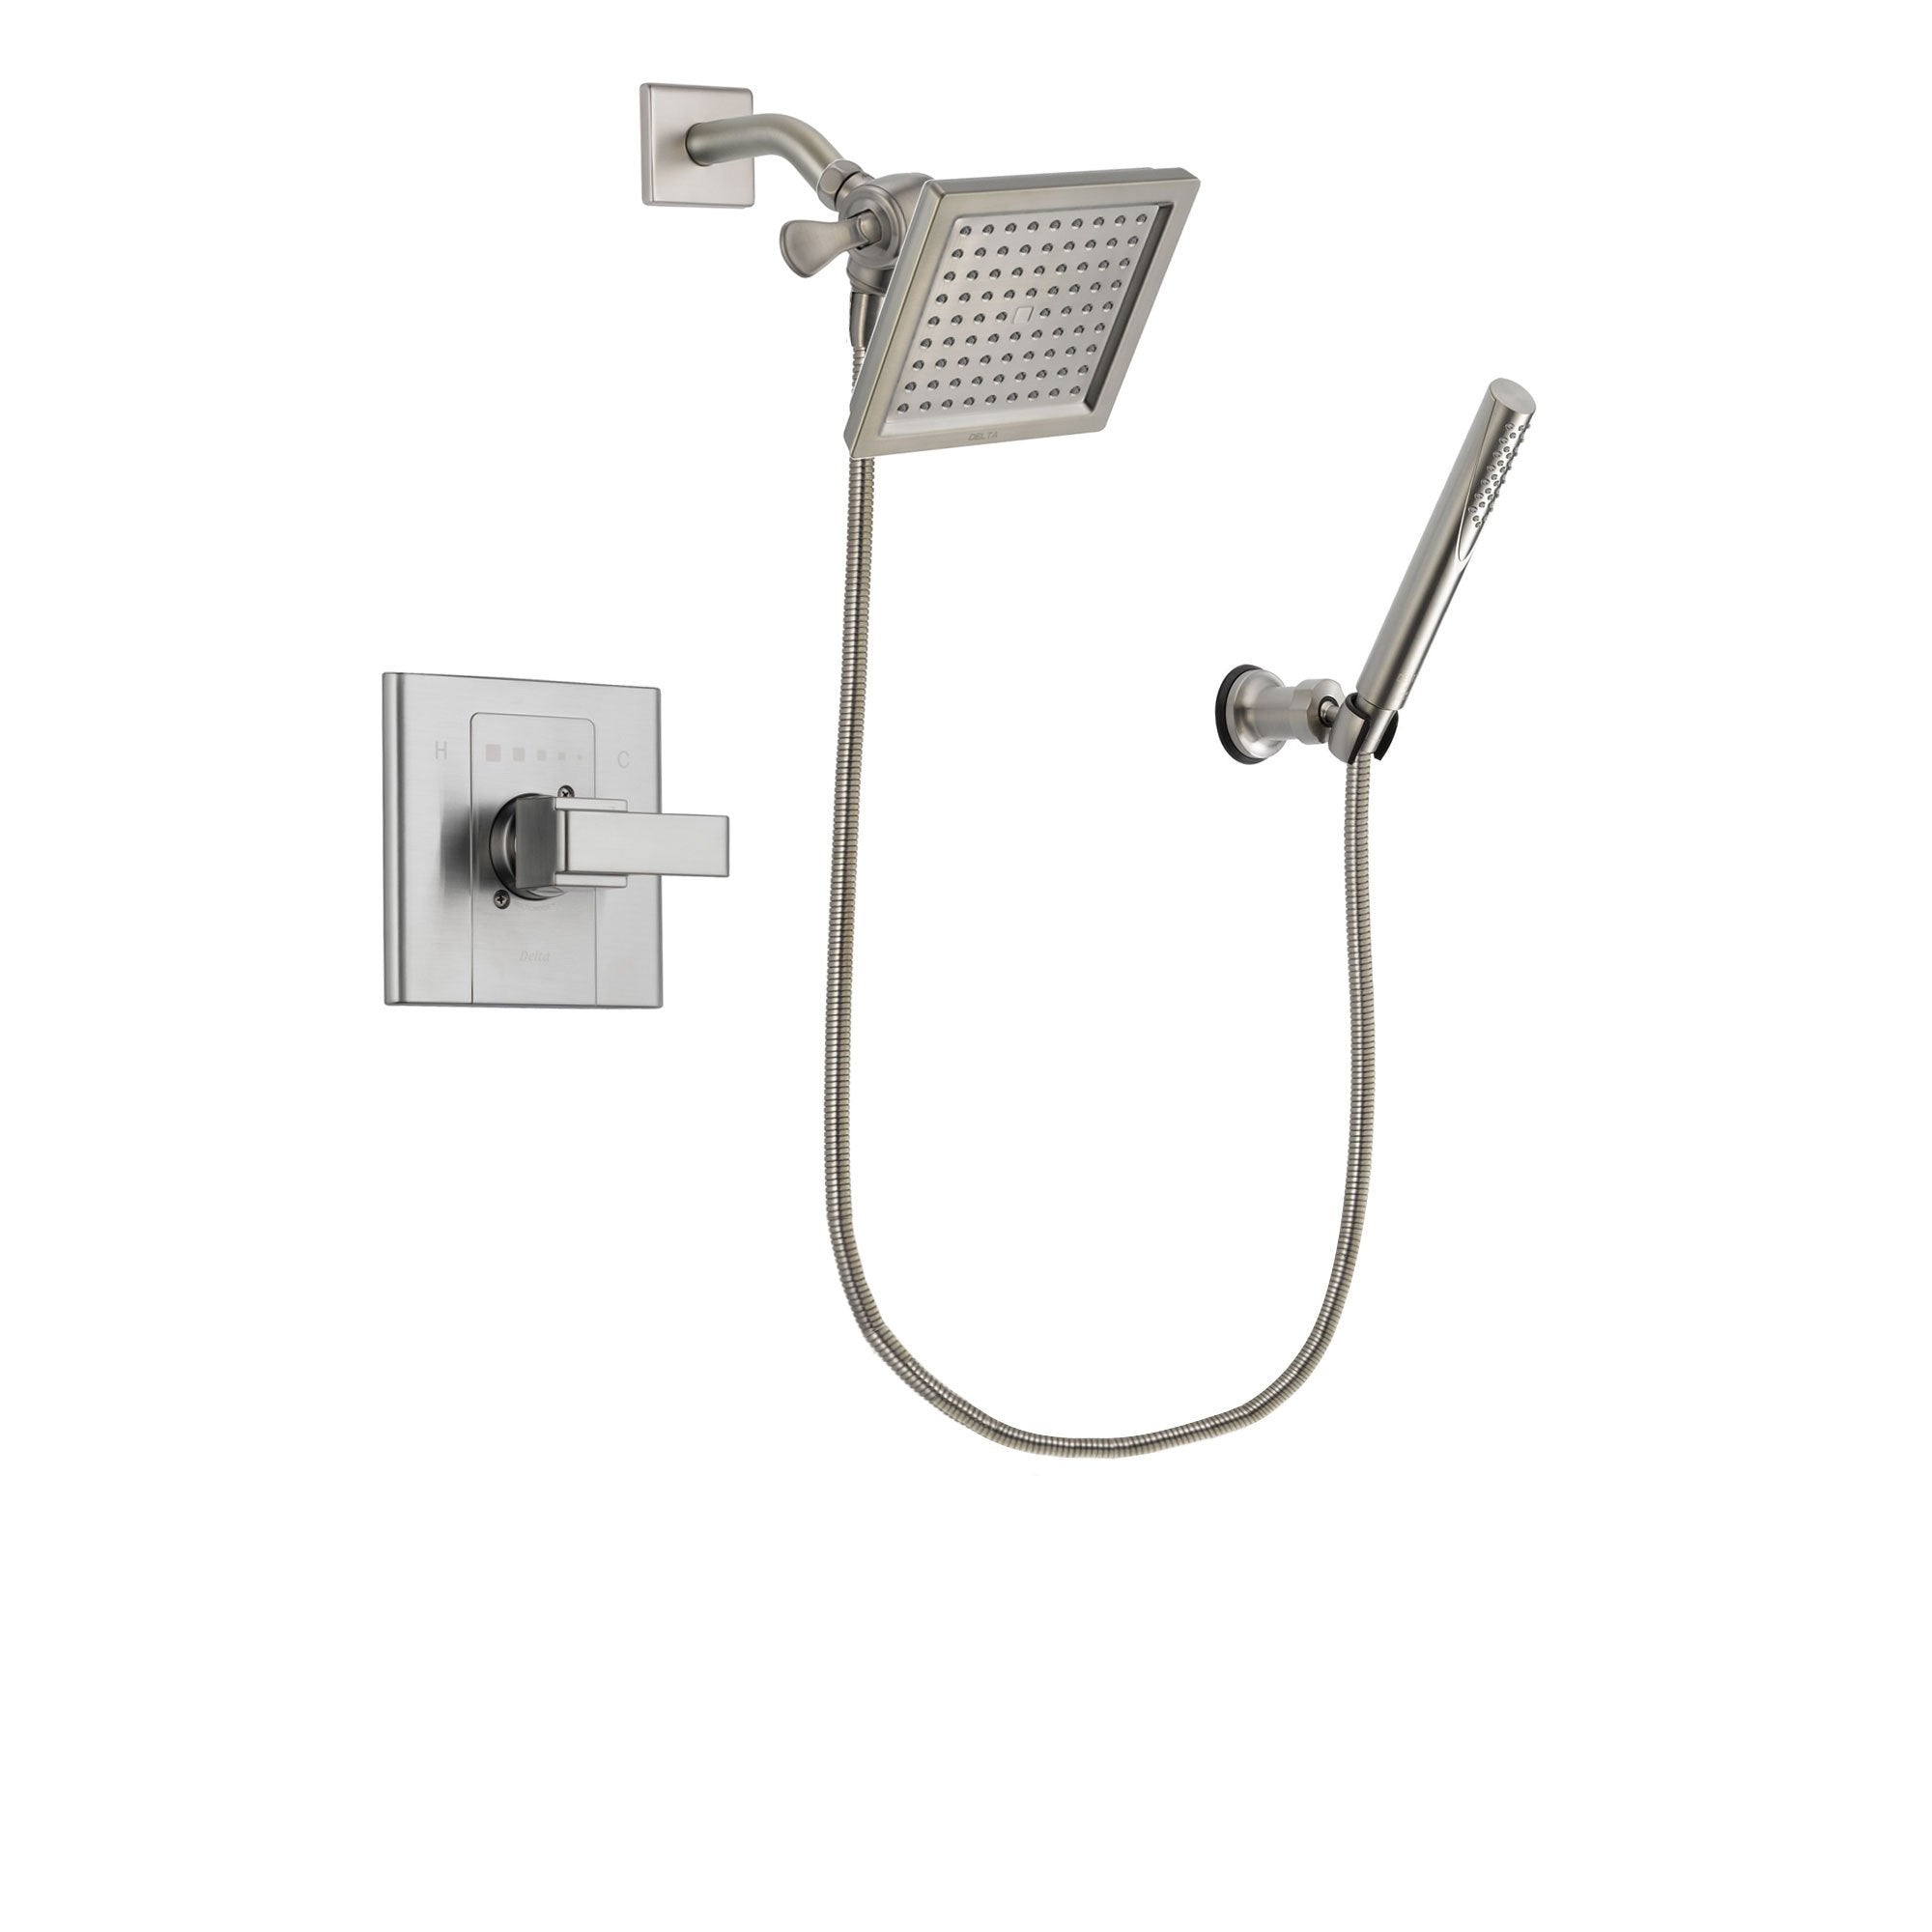 Delta Arzo Stainless Steel Finish Shower Faucet System Package with 6.5-inch Square Rain Showerhead and Modern Handheld Shower Spray Includes Rough-in Valve DSP2140V